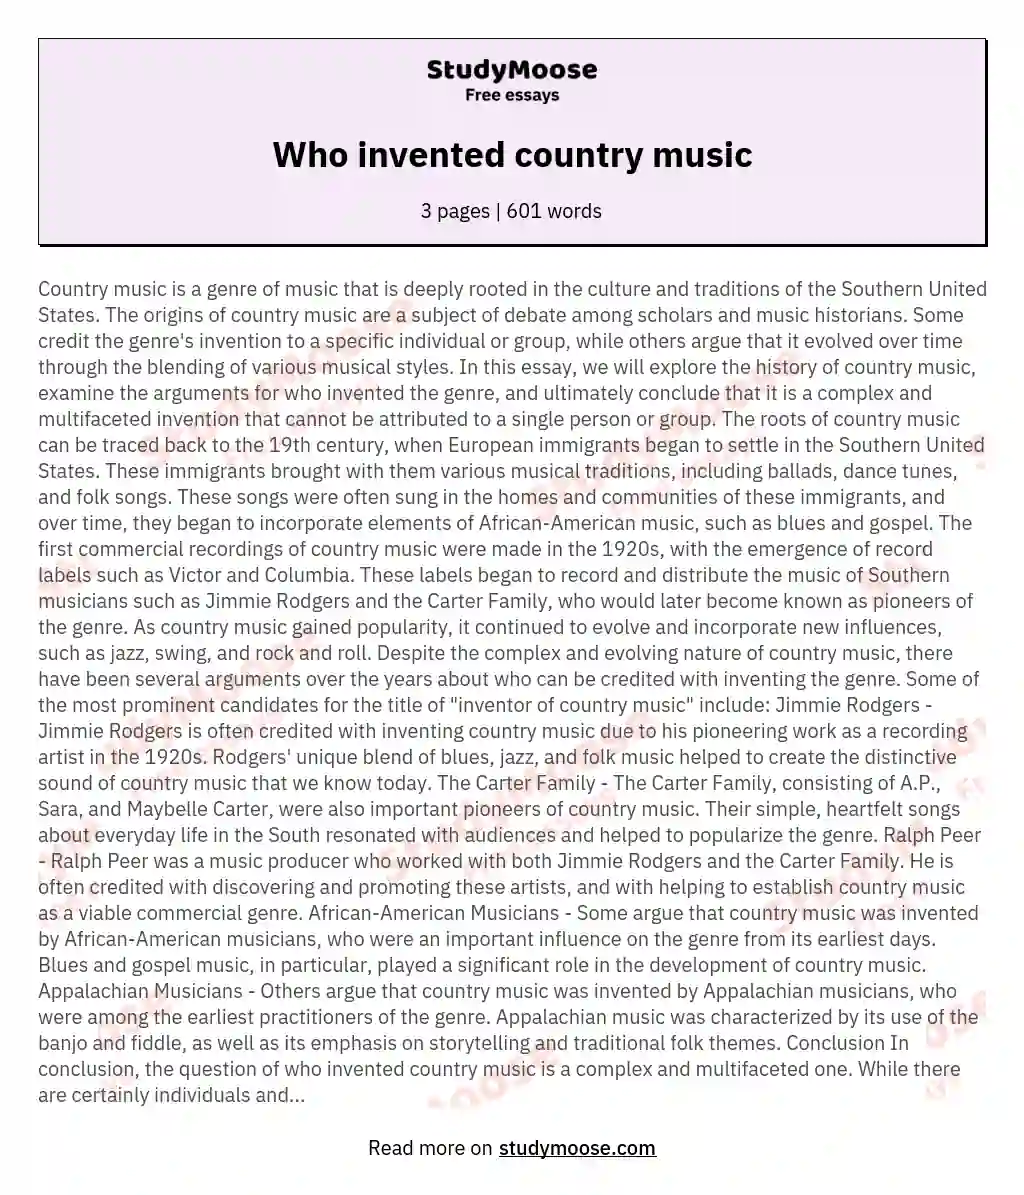 Who invented country music essay